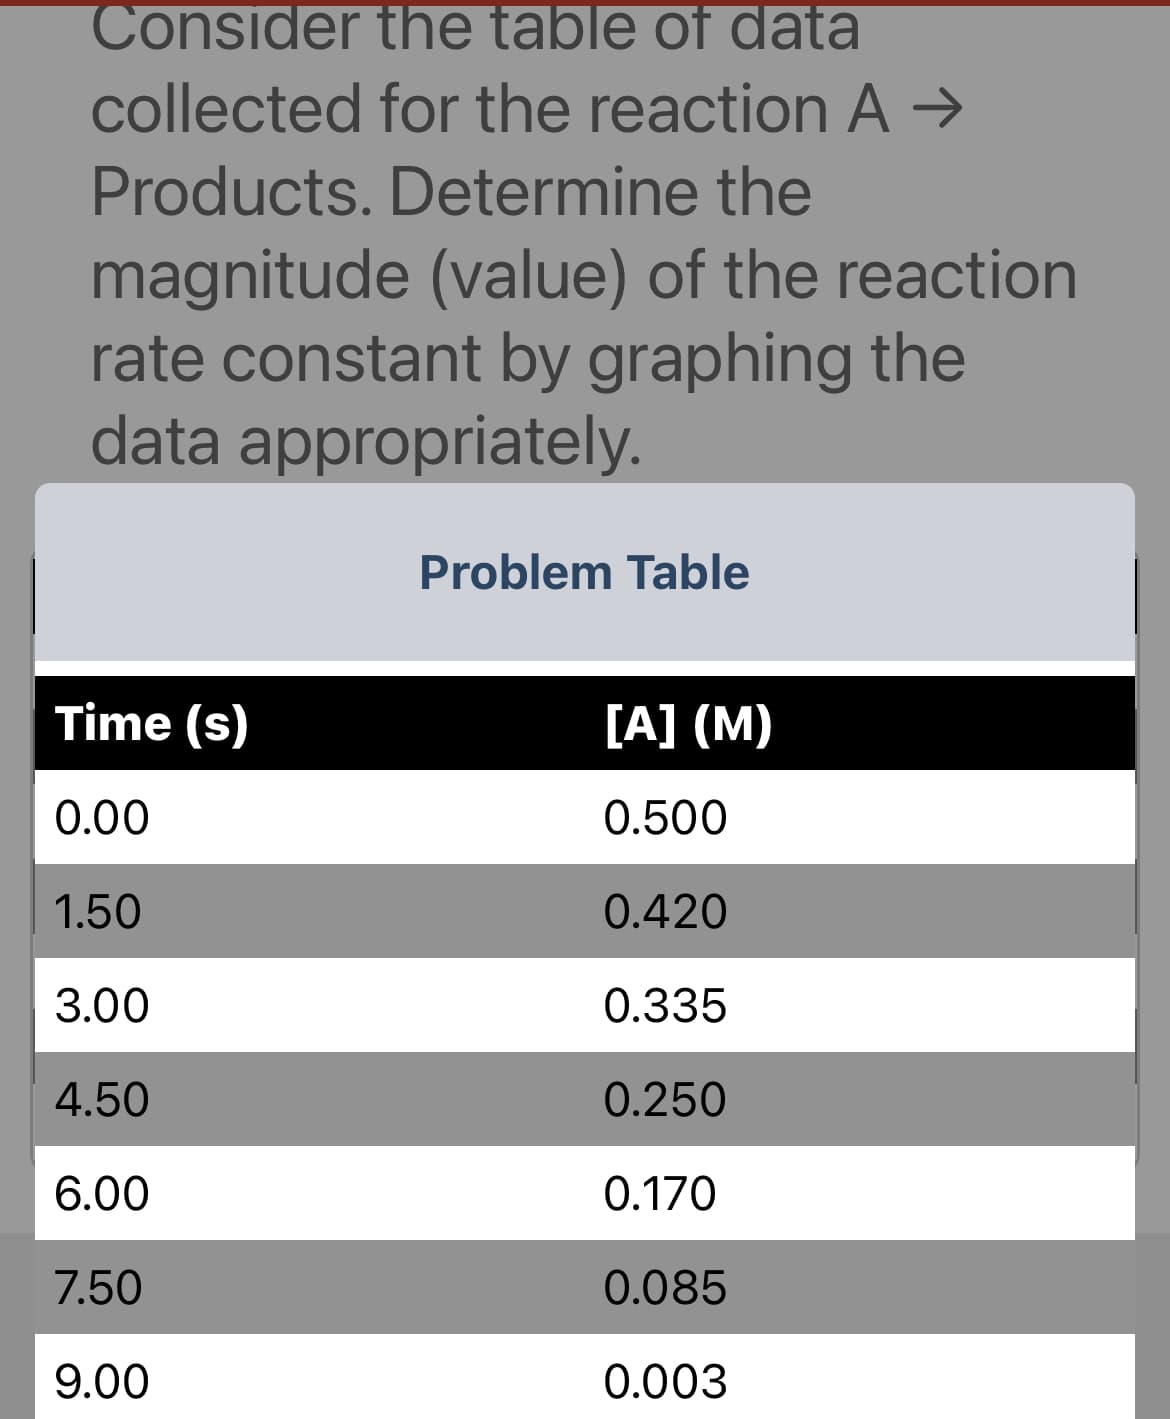 Consider the table of data
collected for the reaction A →
Products. Determine the
magnitude (value) of the reaction
rate constant by graphing the
data appropriately.
Time (s)
0.00
1.50
3.00
4.50
6.00
7.50
9.00
Problem Table
[A] (M)
0.500
0.420
0.335
0.250
0.170
0.085
0.003